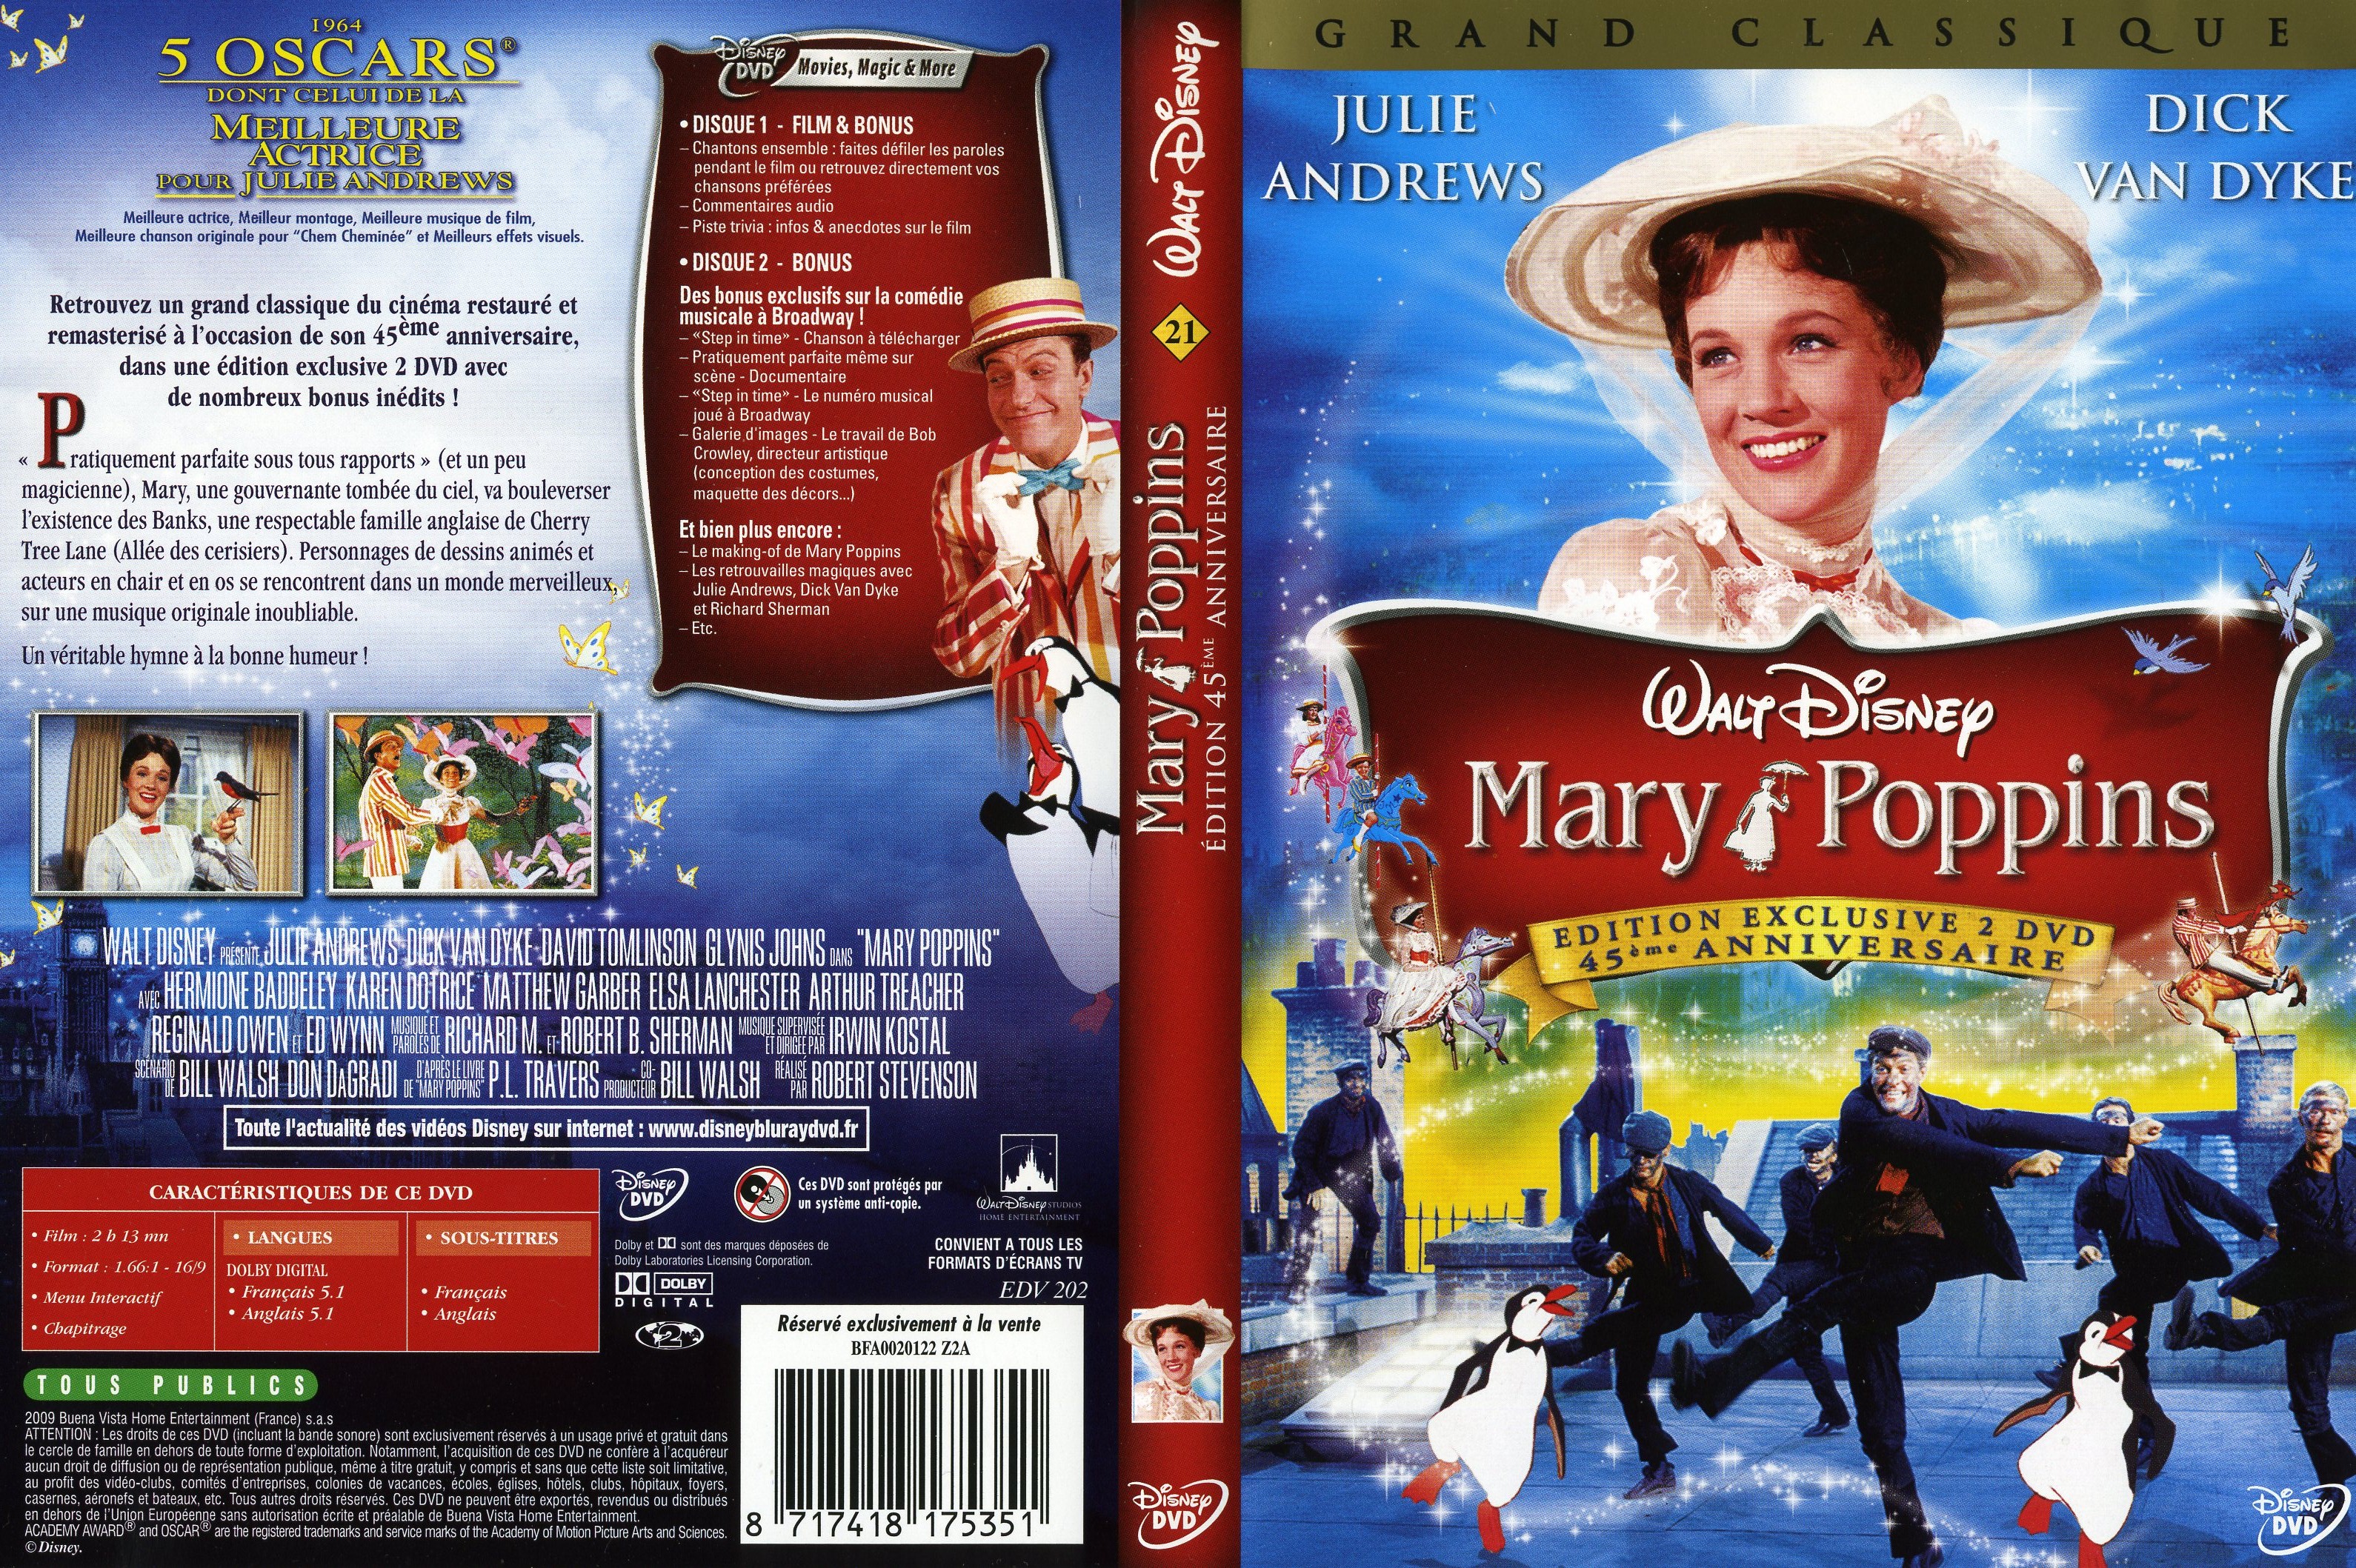 Jaquette DVD Mary Poppins v3